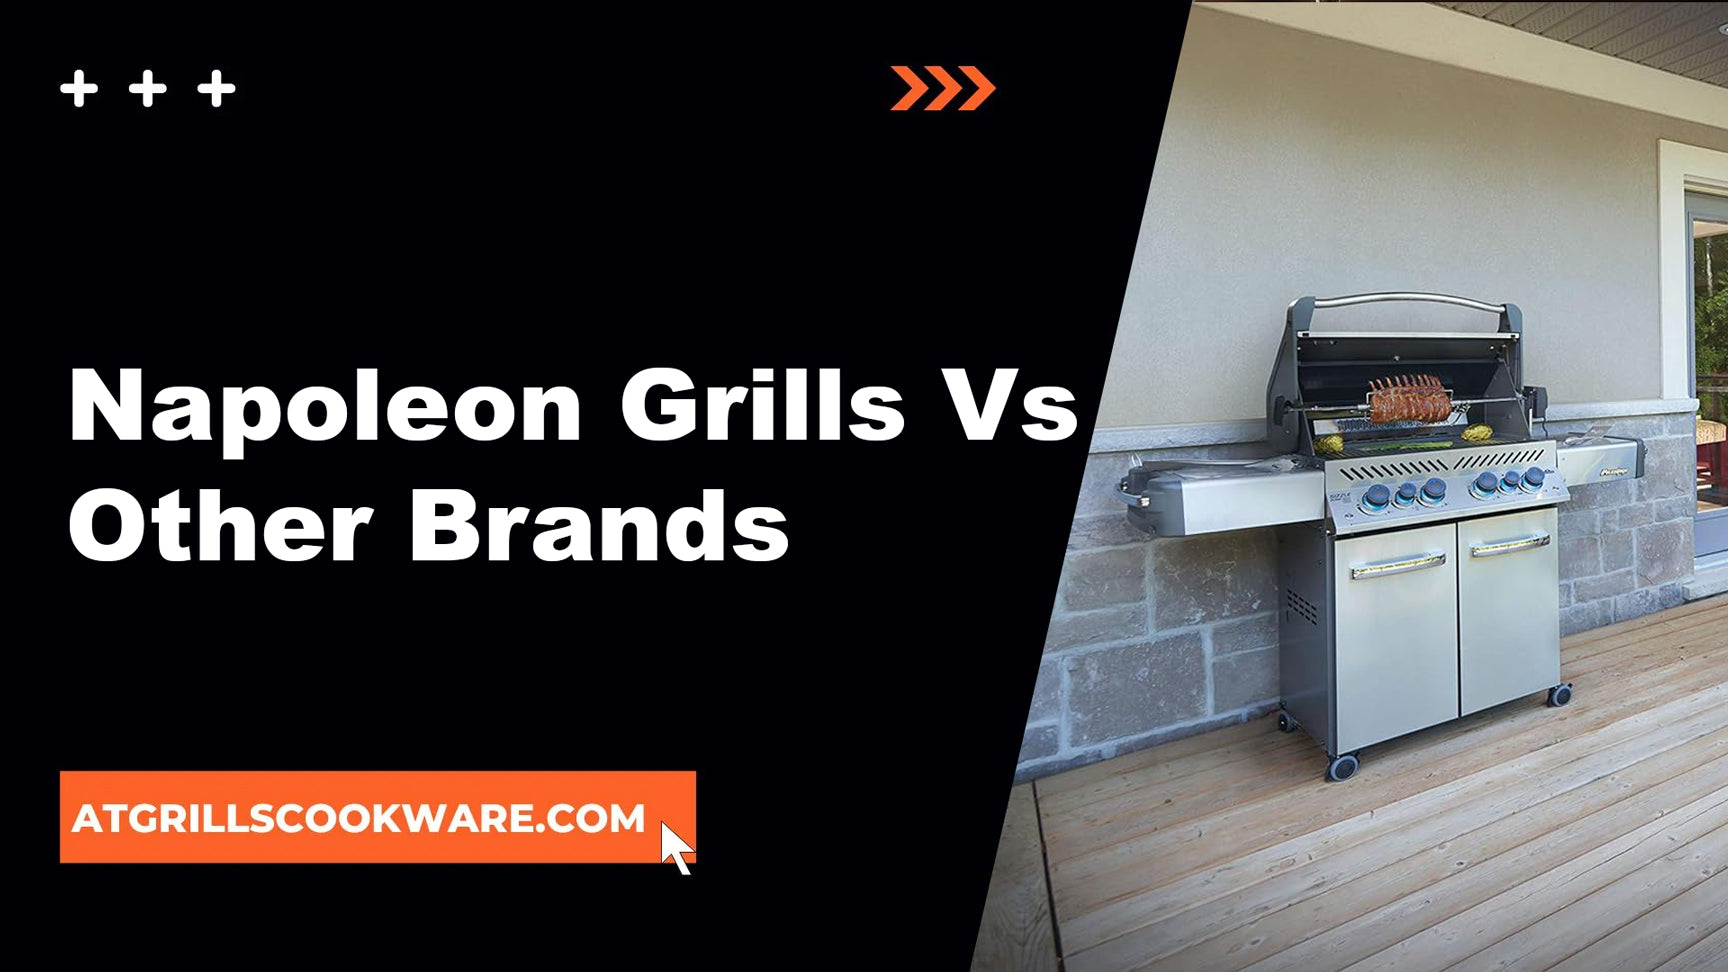 Napoleon Grills Vs Other Brands - A Comparative Analysis